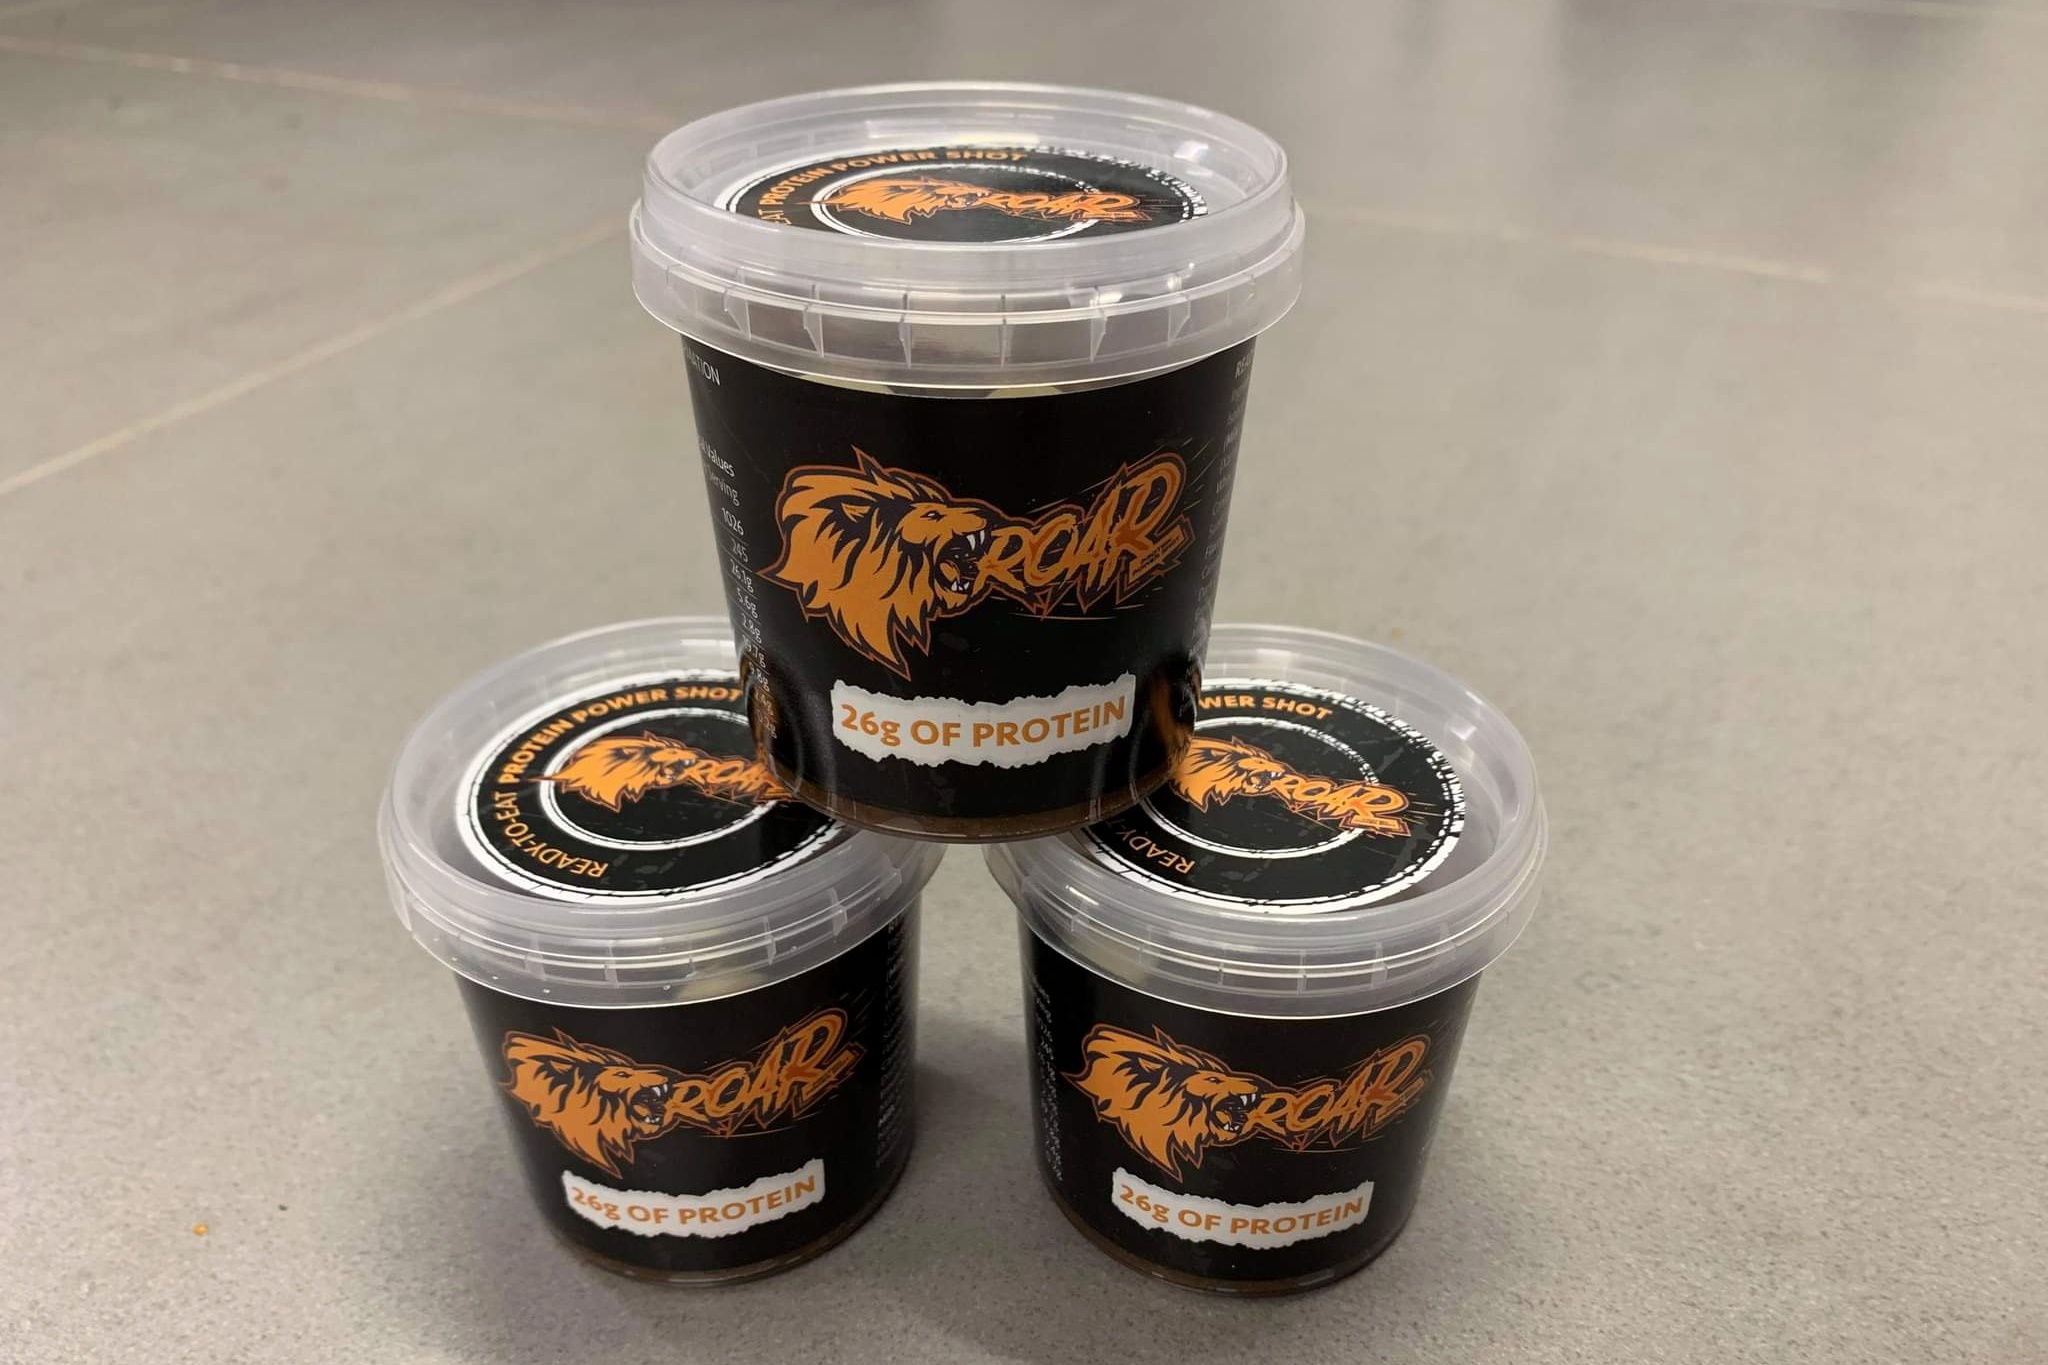 Protein power shot pots three on top of each other with ROAR branding